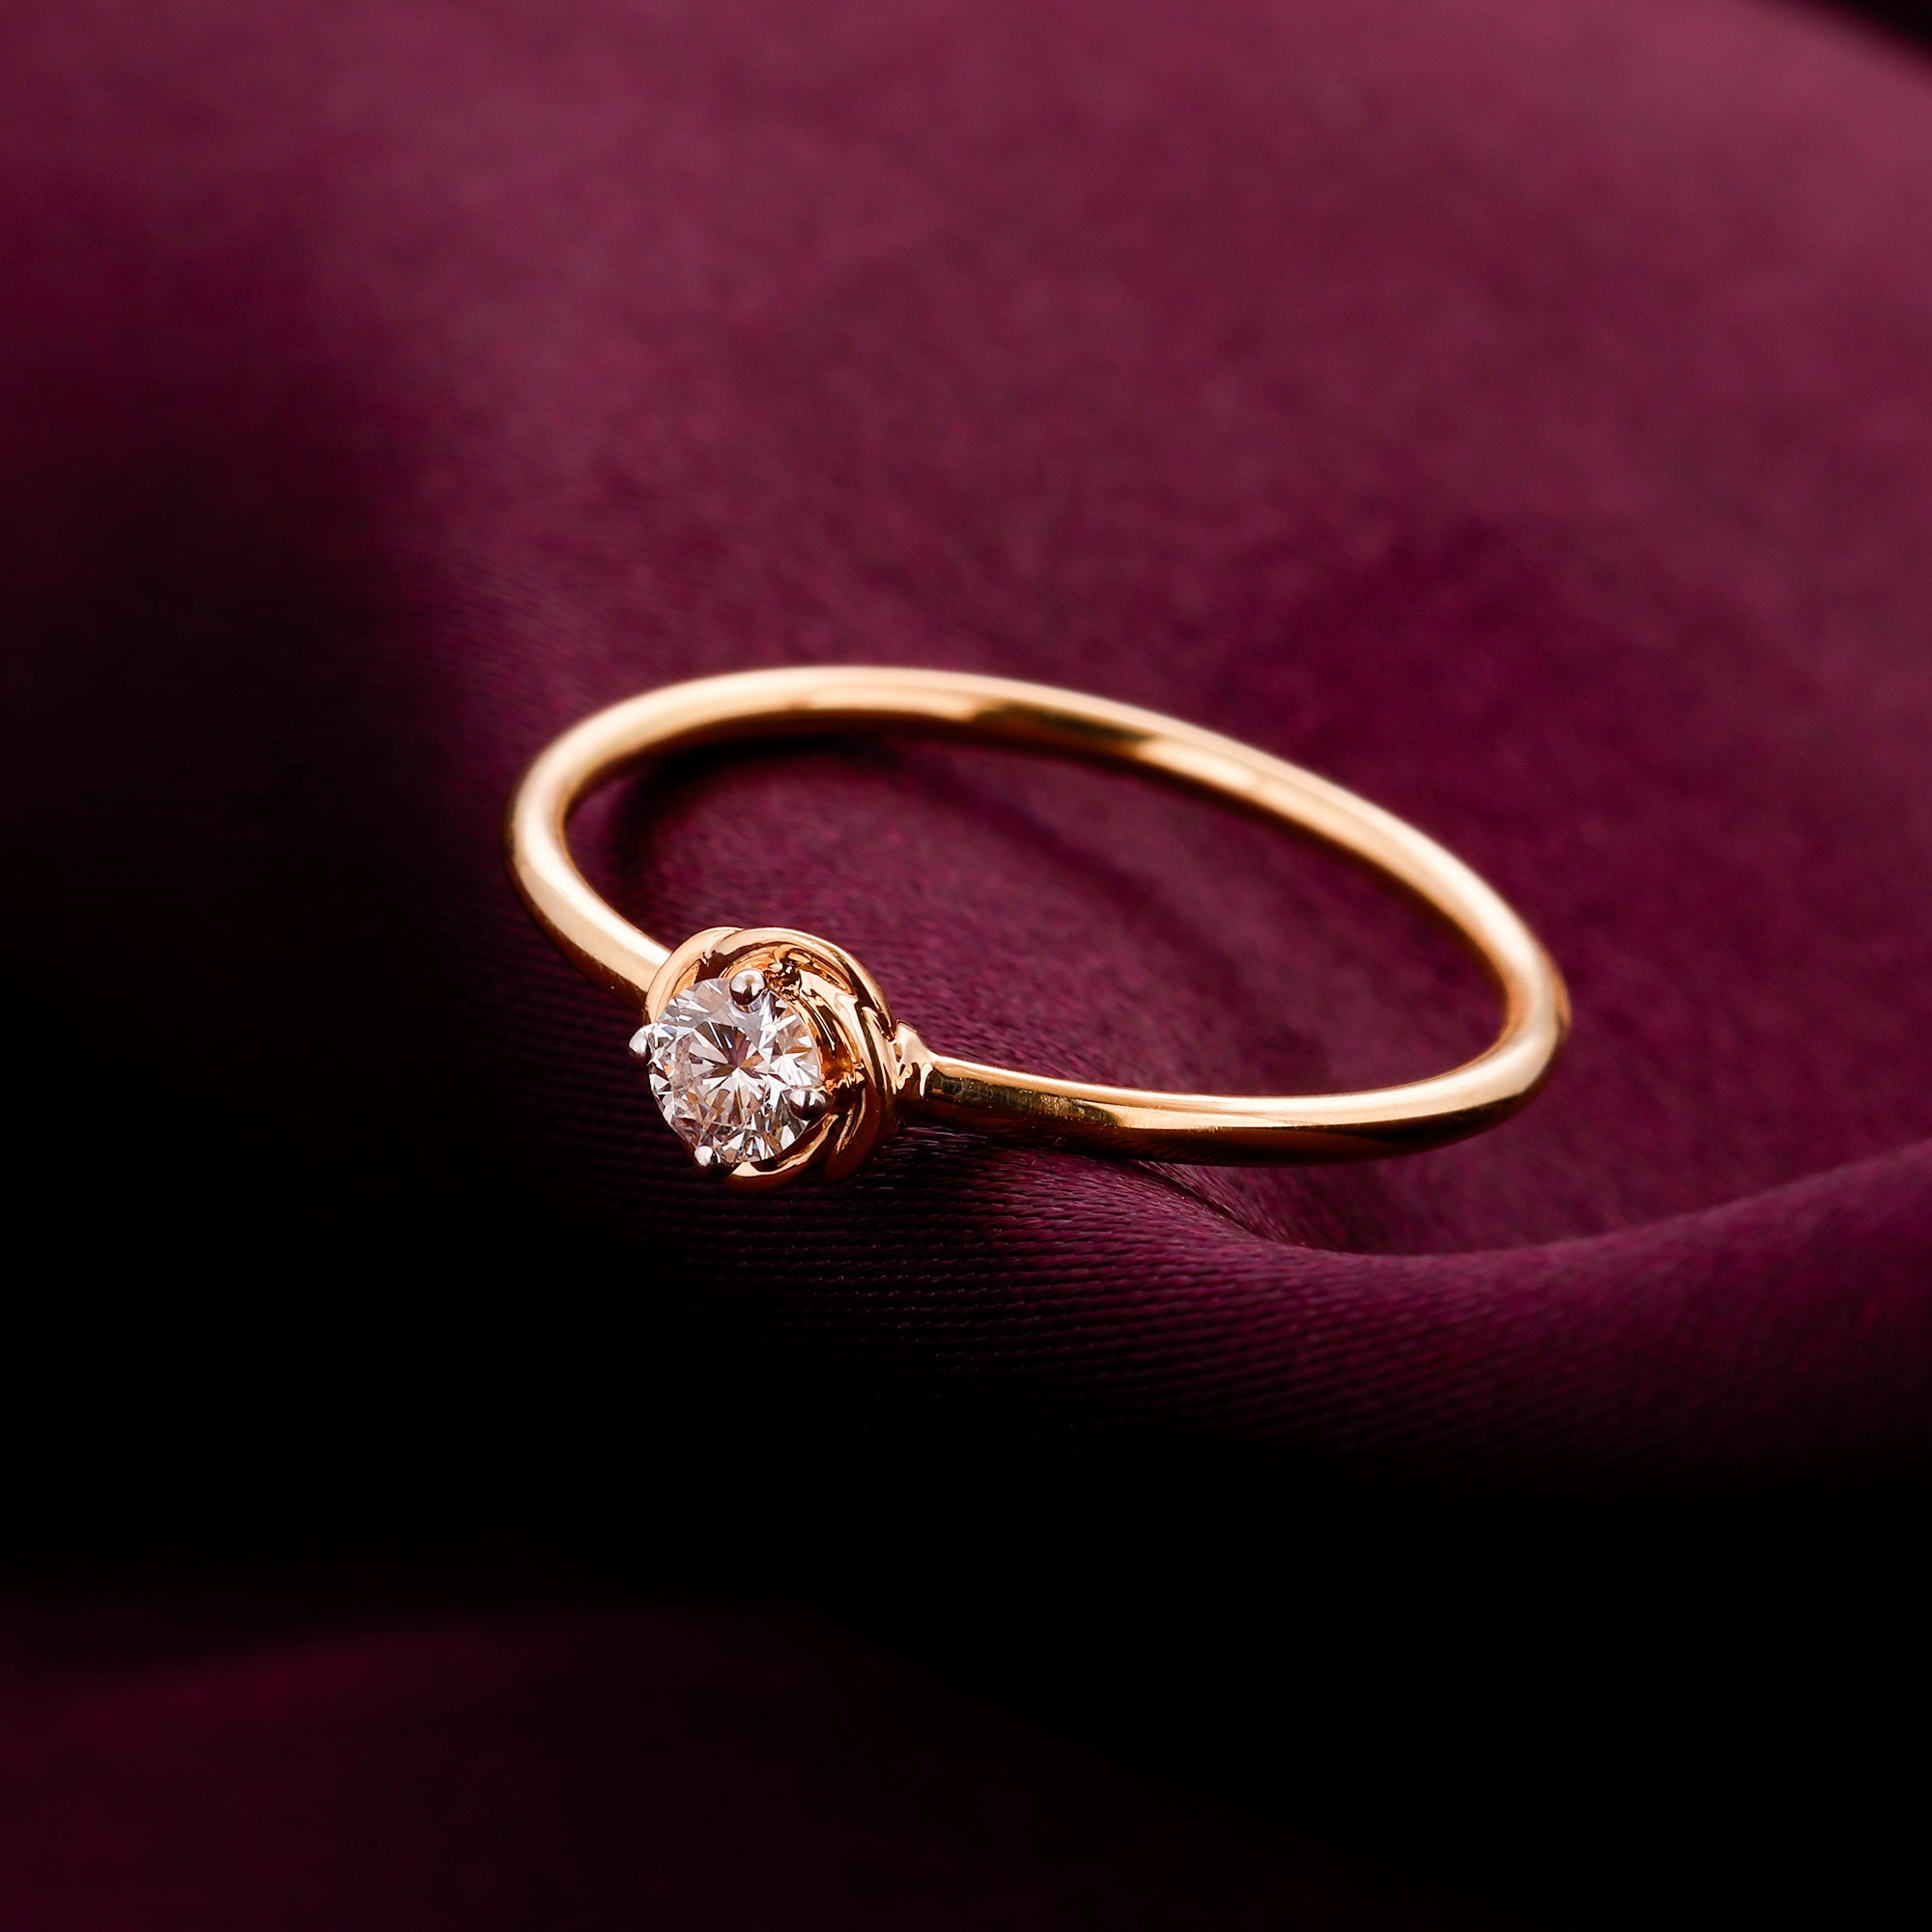 Modern Solitaire Engagement Rings with a Fun Twist | Blog | Valina Engagement  Ring